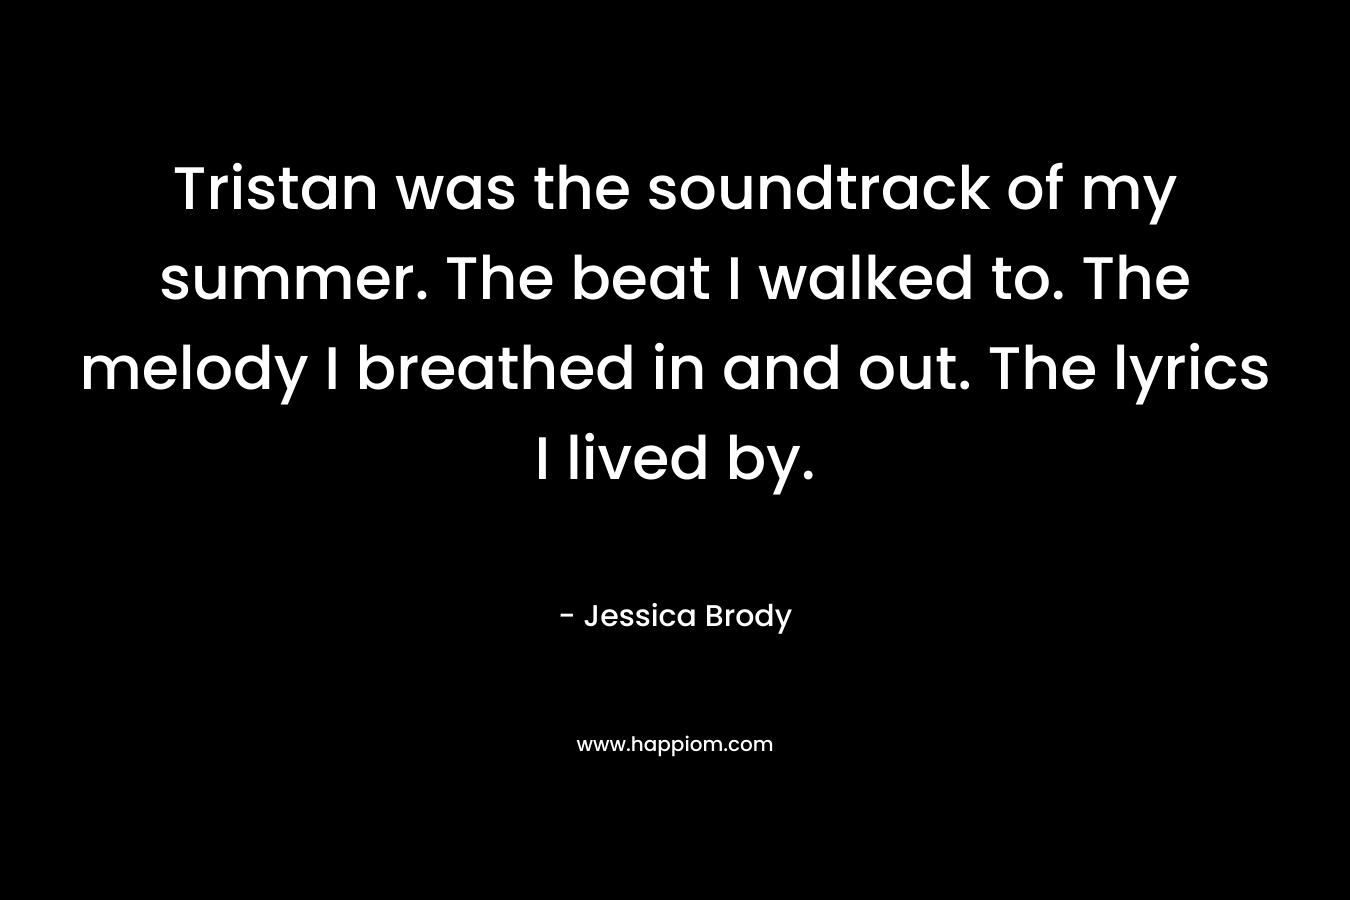 Tristan was the soundtrack of my summer. The beat I walked to. The melody I breathed in and out. The lyrics I lived by.